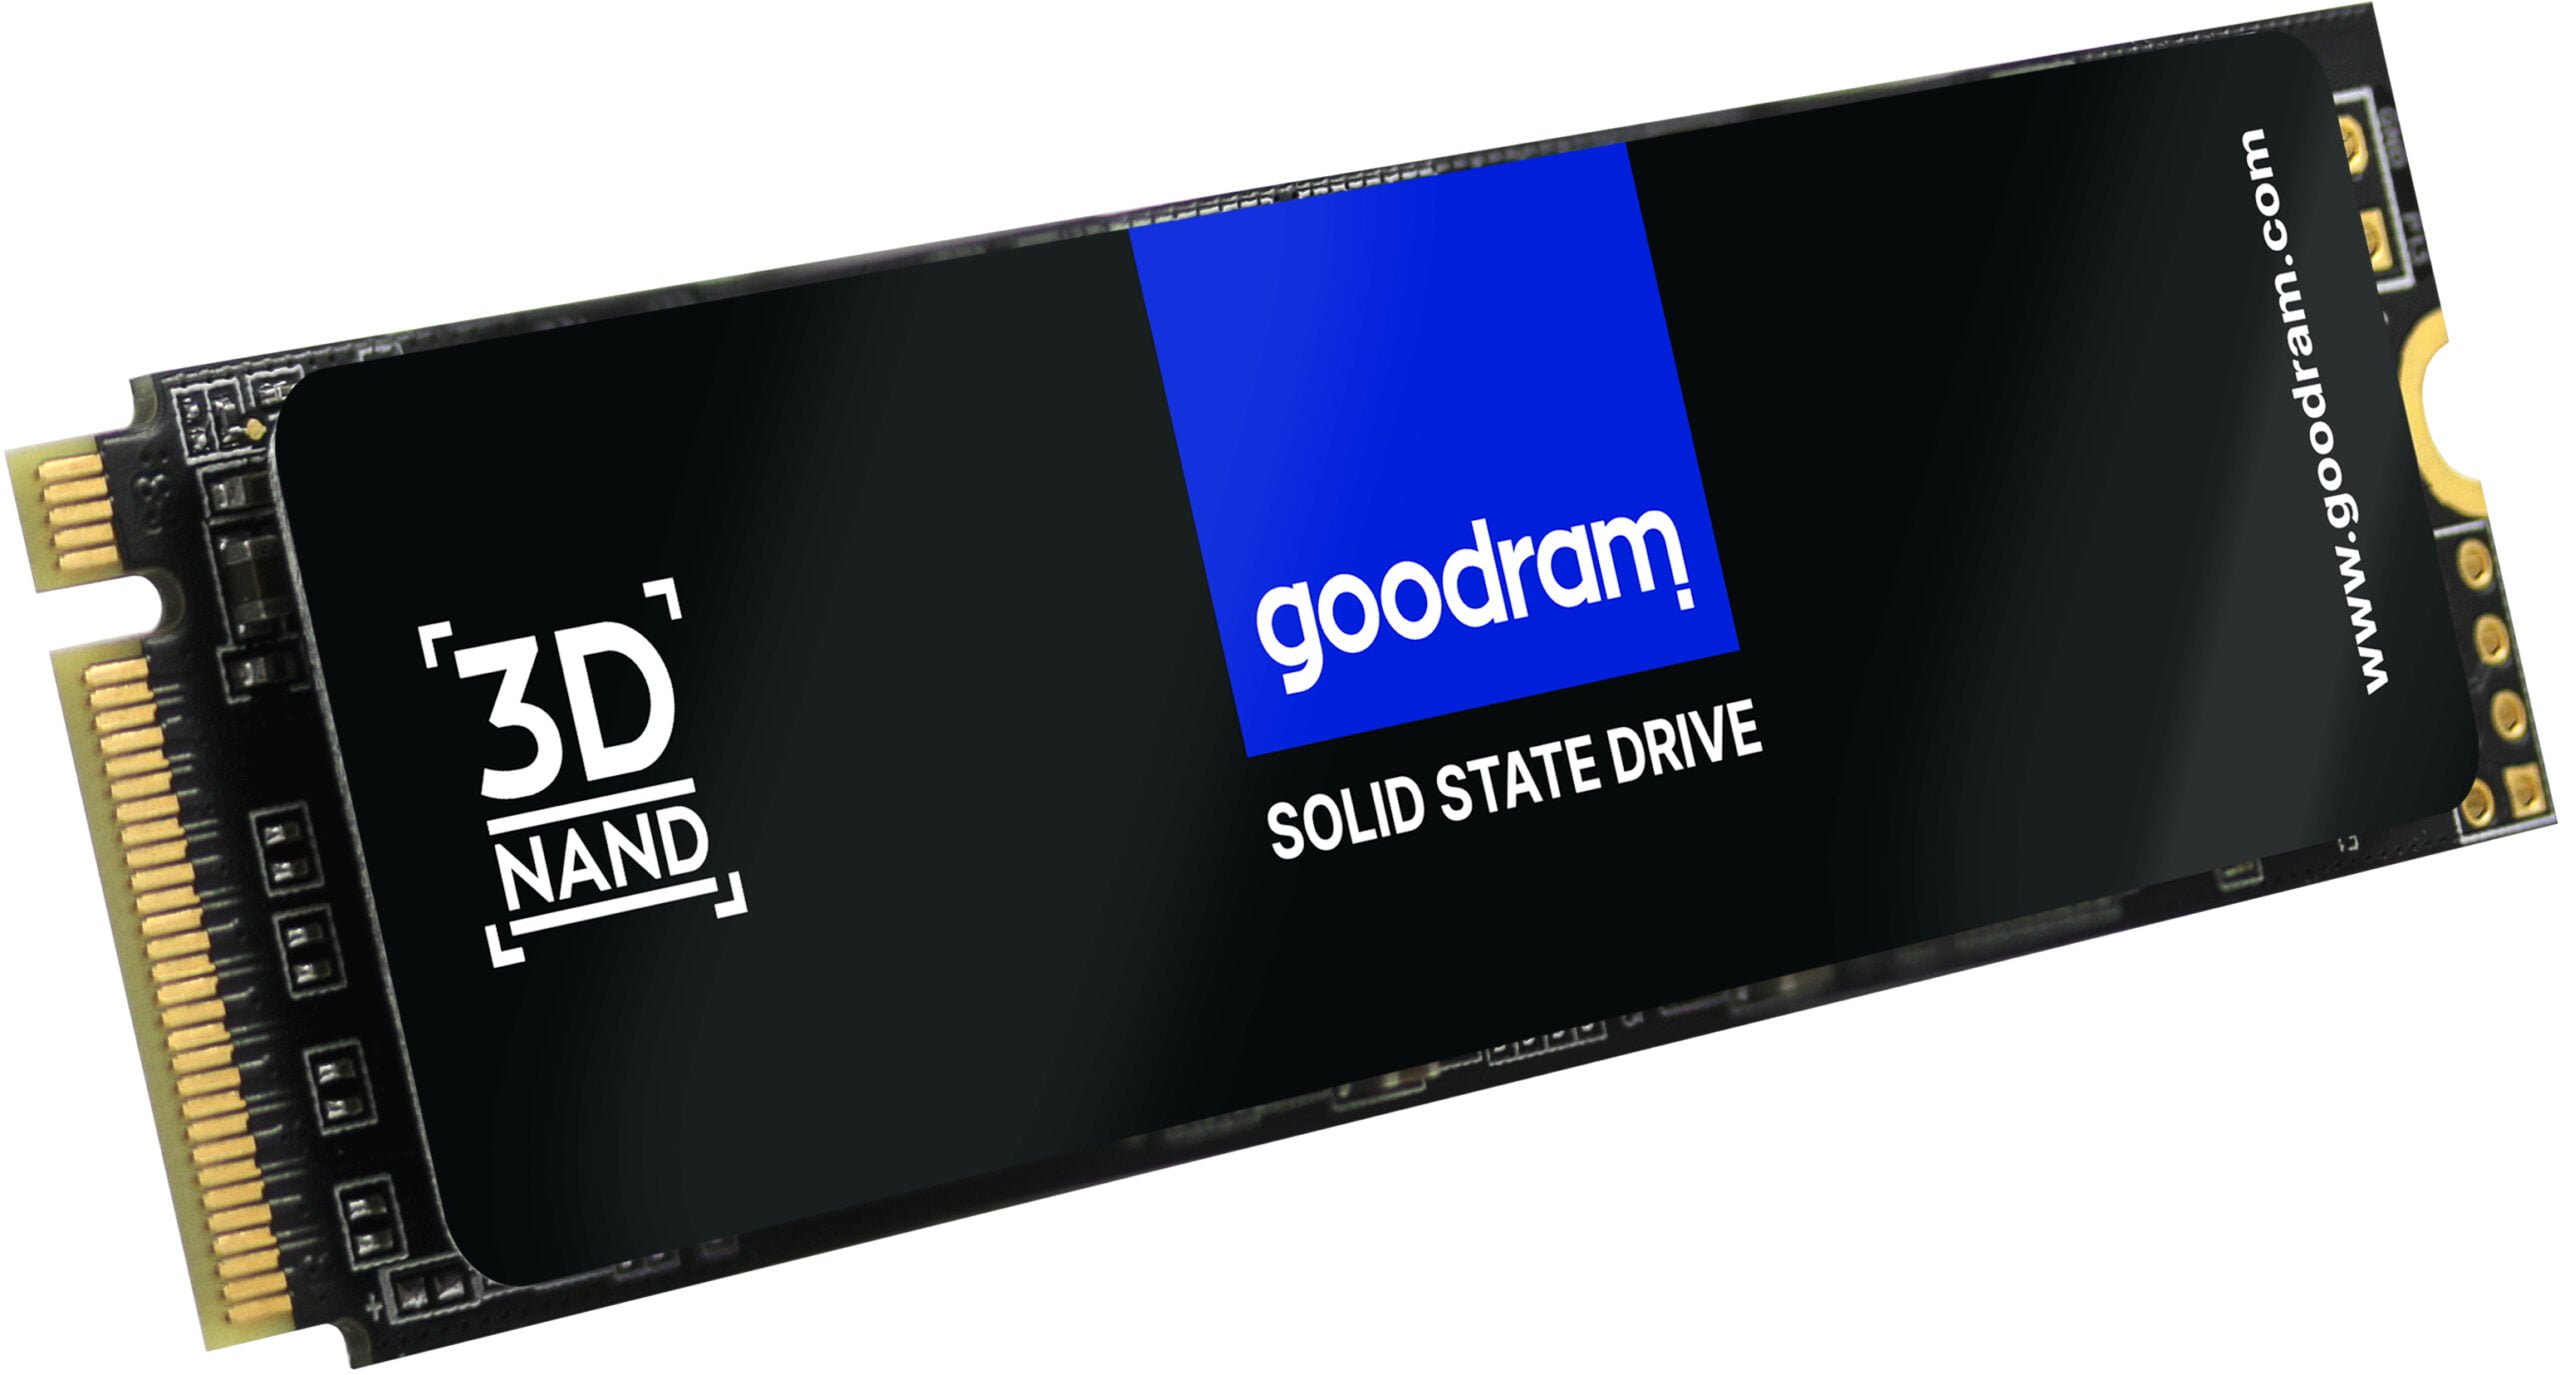 Goodram PX500 Recommended M.2 PCIe 3.0 SSD